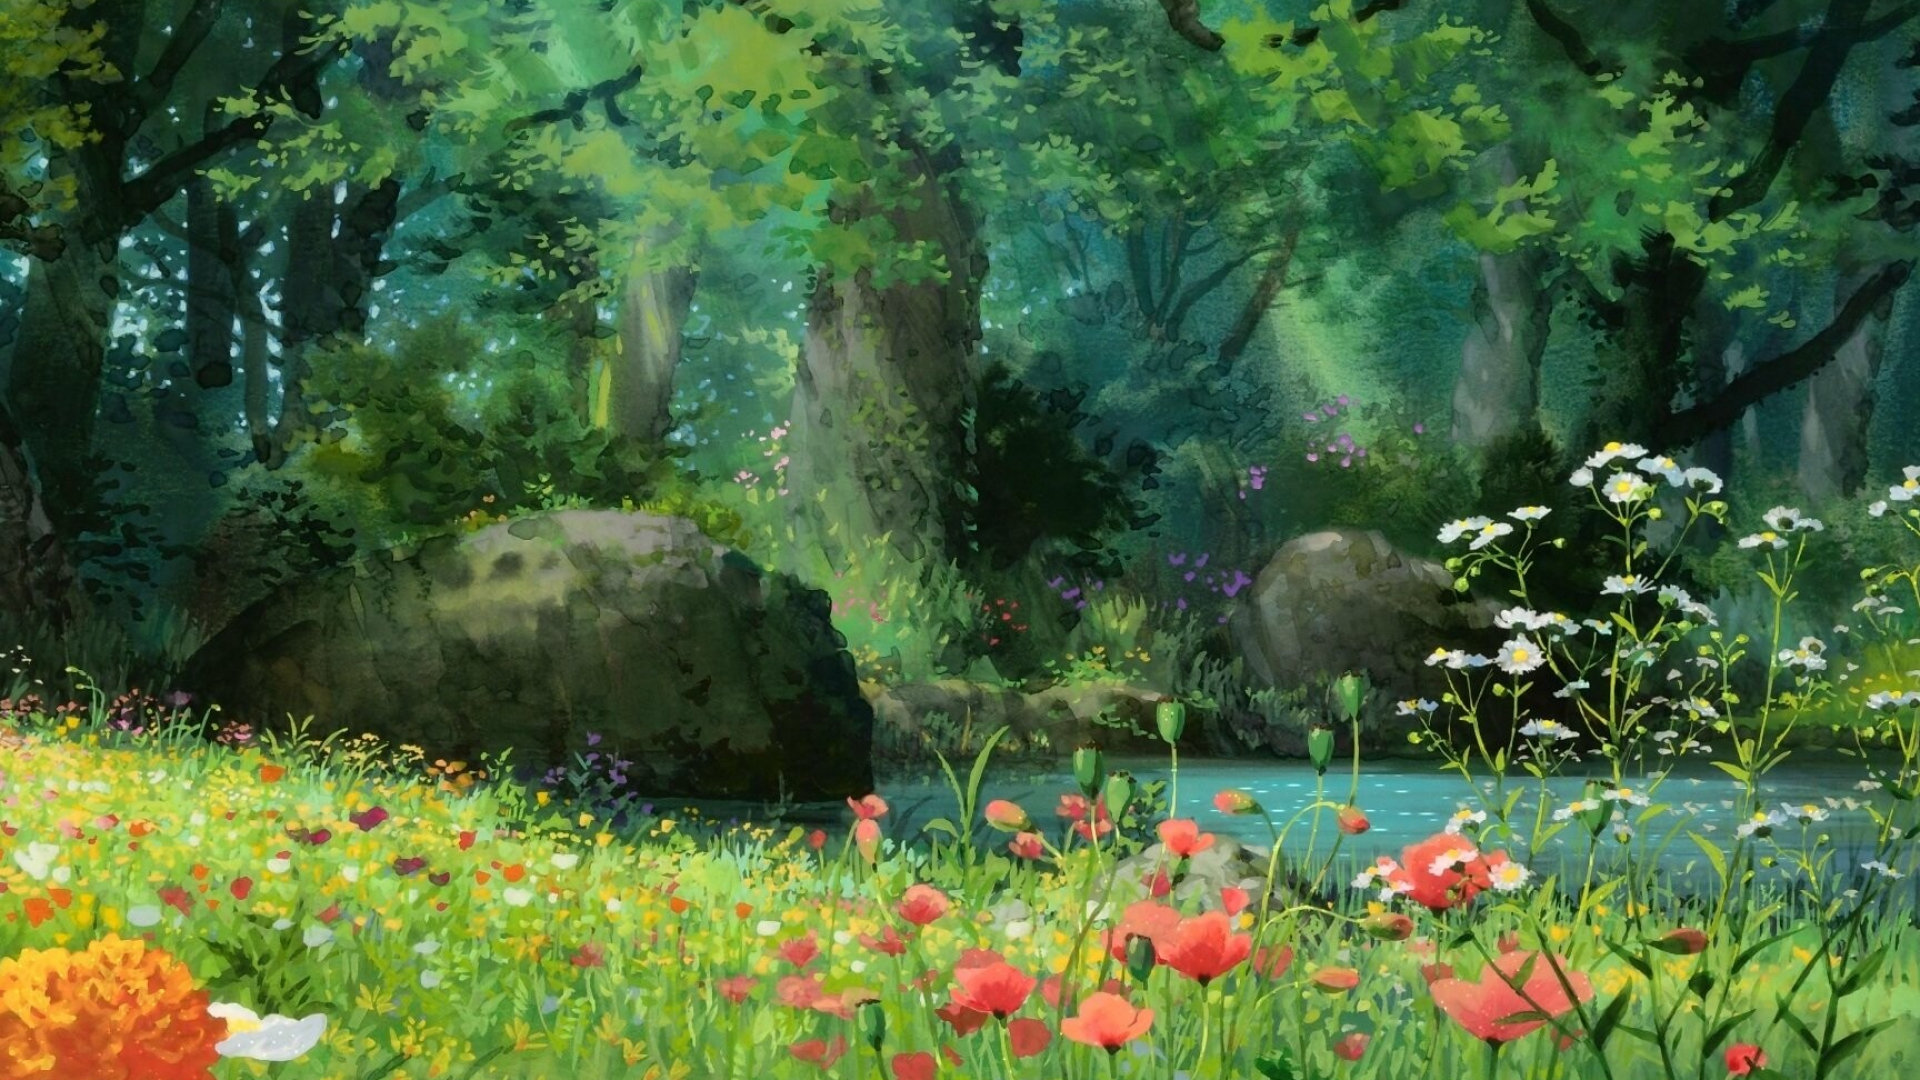 The Secret World of Arrietty: The highest-grossing Japanese film at the Japanese box office for the year 2010, Scenery. 1920x1080 Full HD Wallpaper.